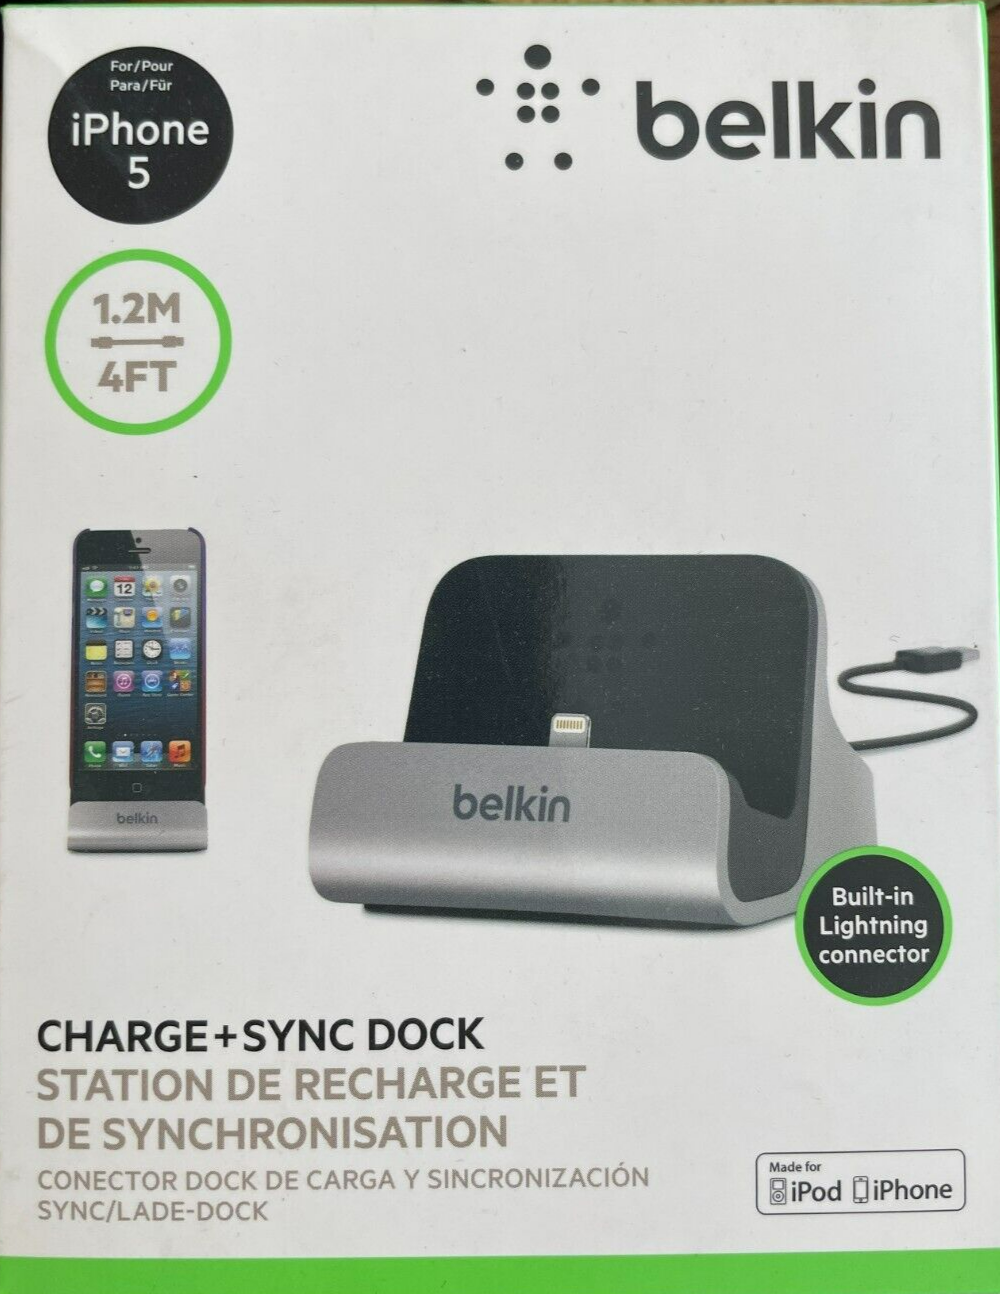 Belkin - F8J045BT - Charge + Sync Dock for iPhone 6 / 6 Plus and 5 / 5S / 5c - $39.95